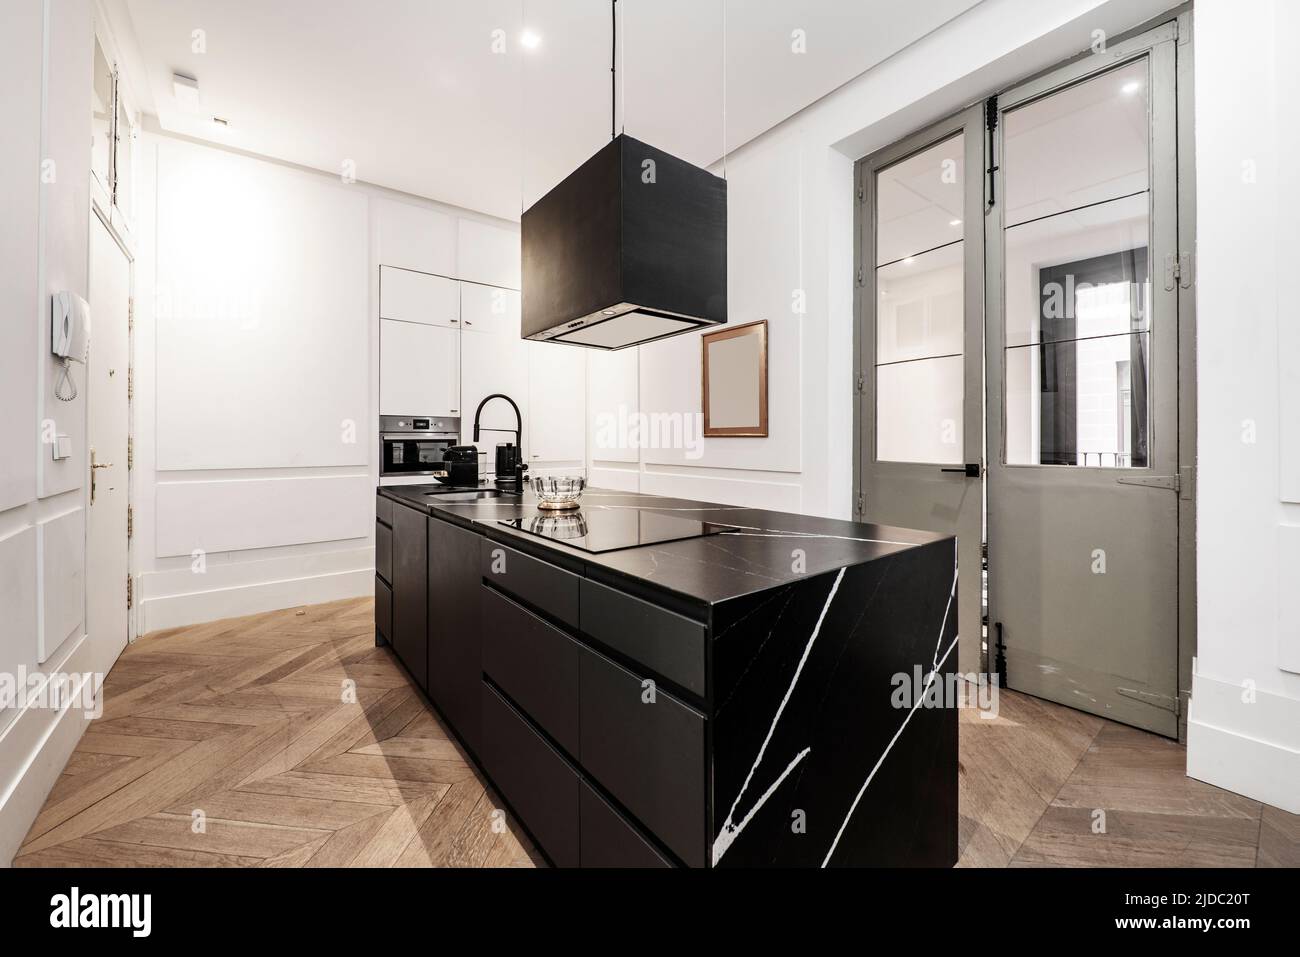 Modern kitchen with central island of wood and black marble, matching extractor hood and oak wood floor Stock Photo